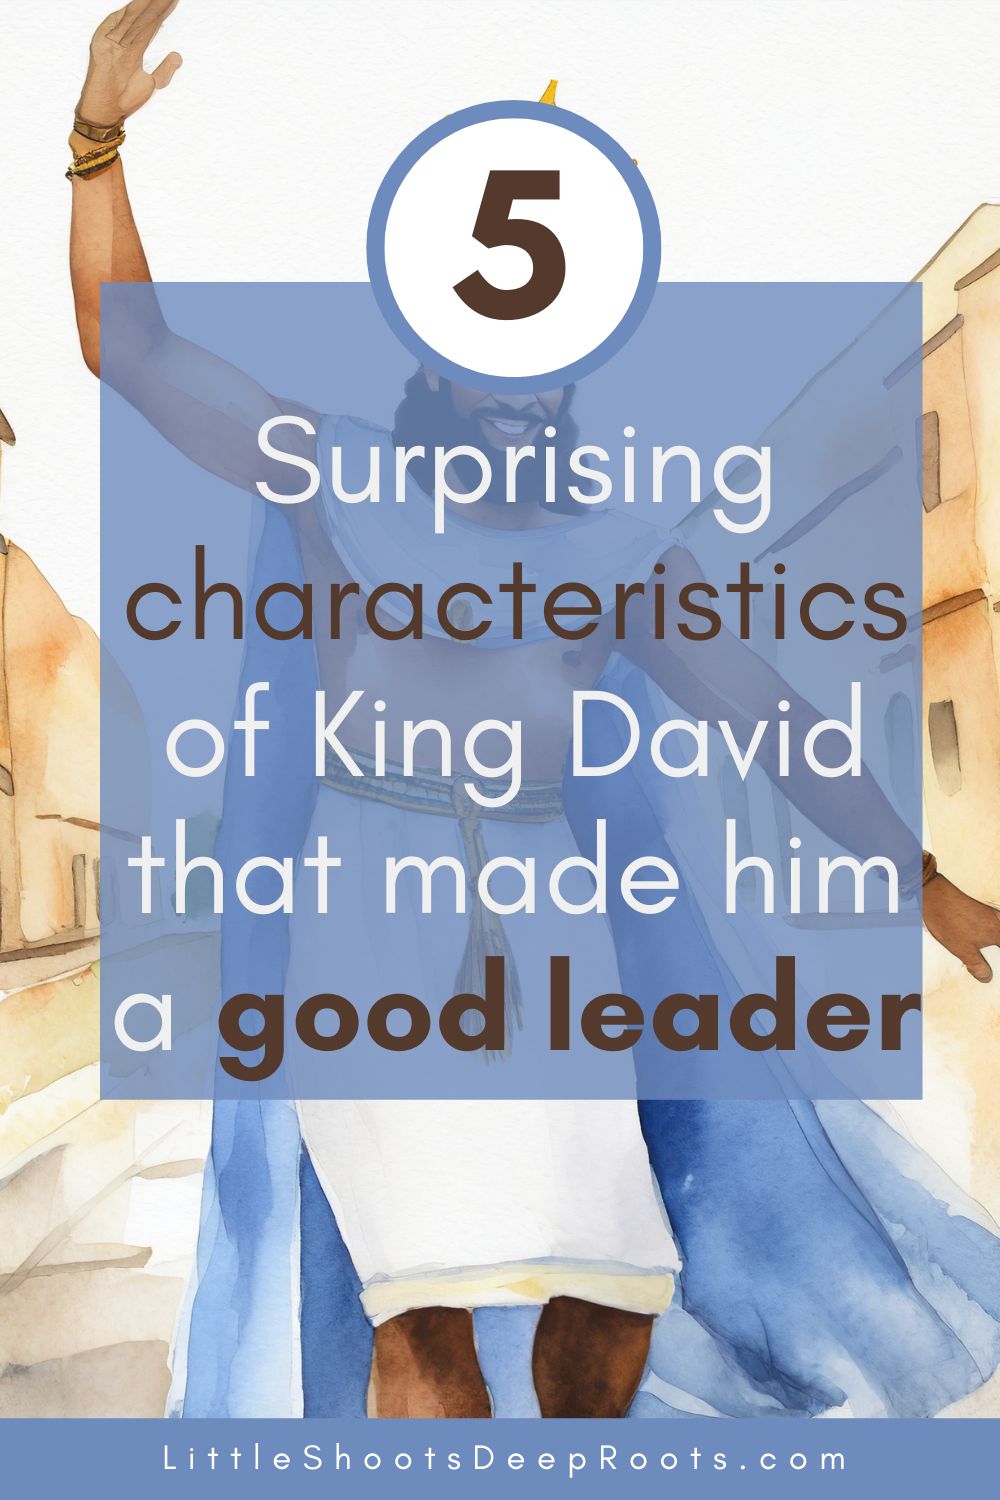 image of a dancing king, with text: 5 Surprising Characteristics of King David that made him a good leader